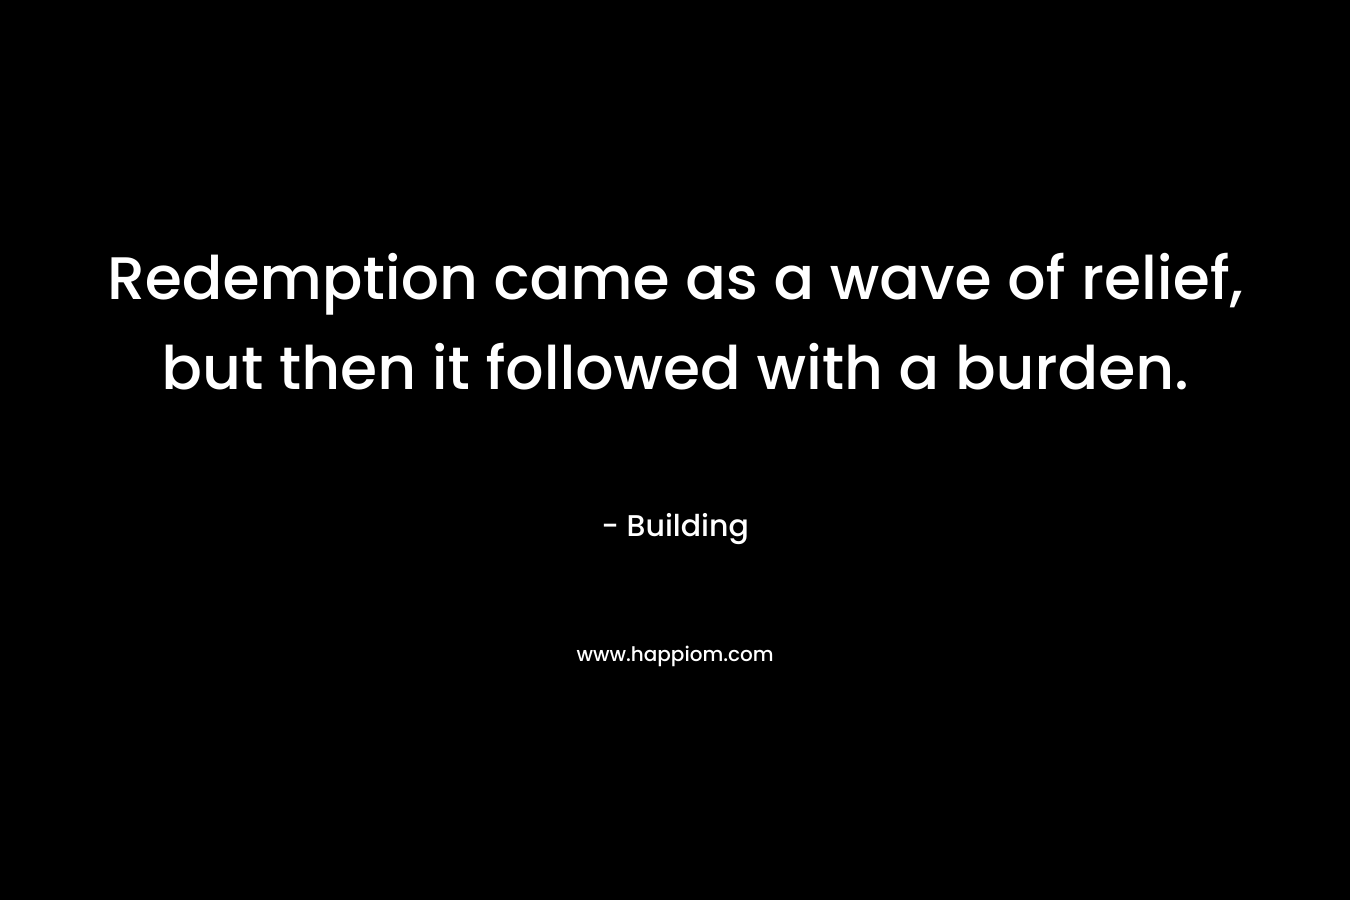 Redemption came as a wave of relief, but then it followed with a burden. – Building